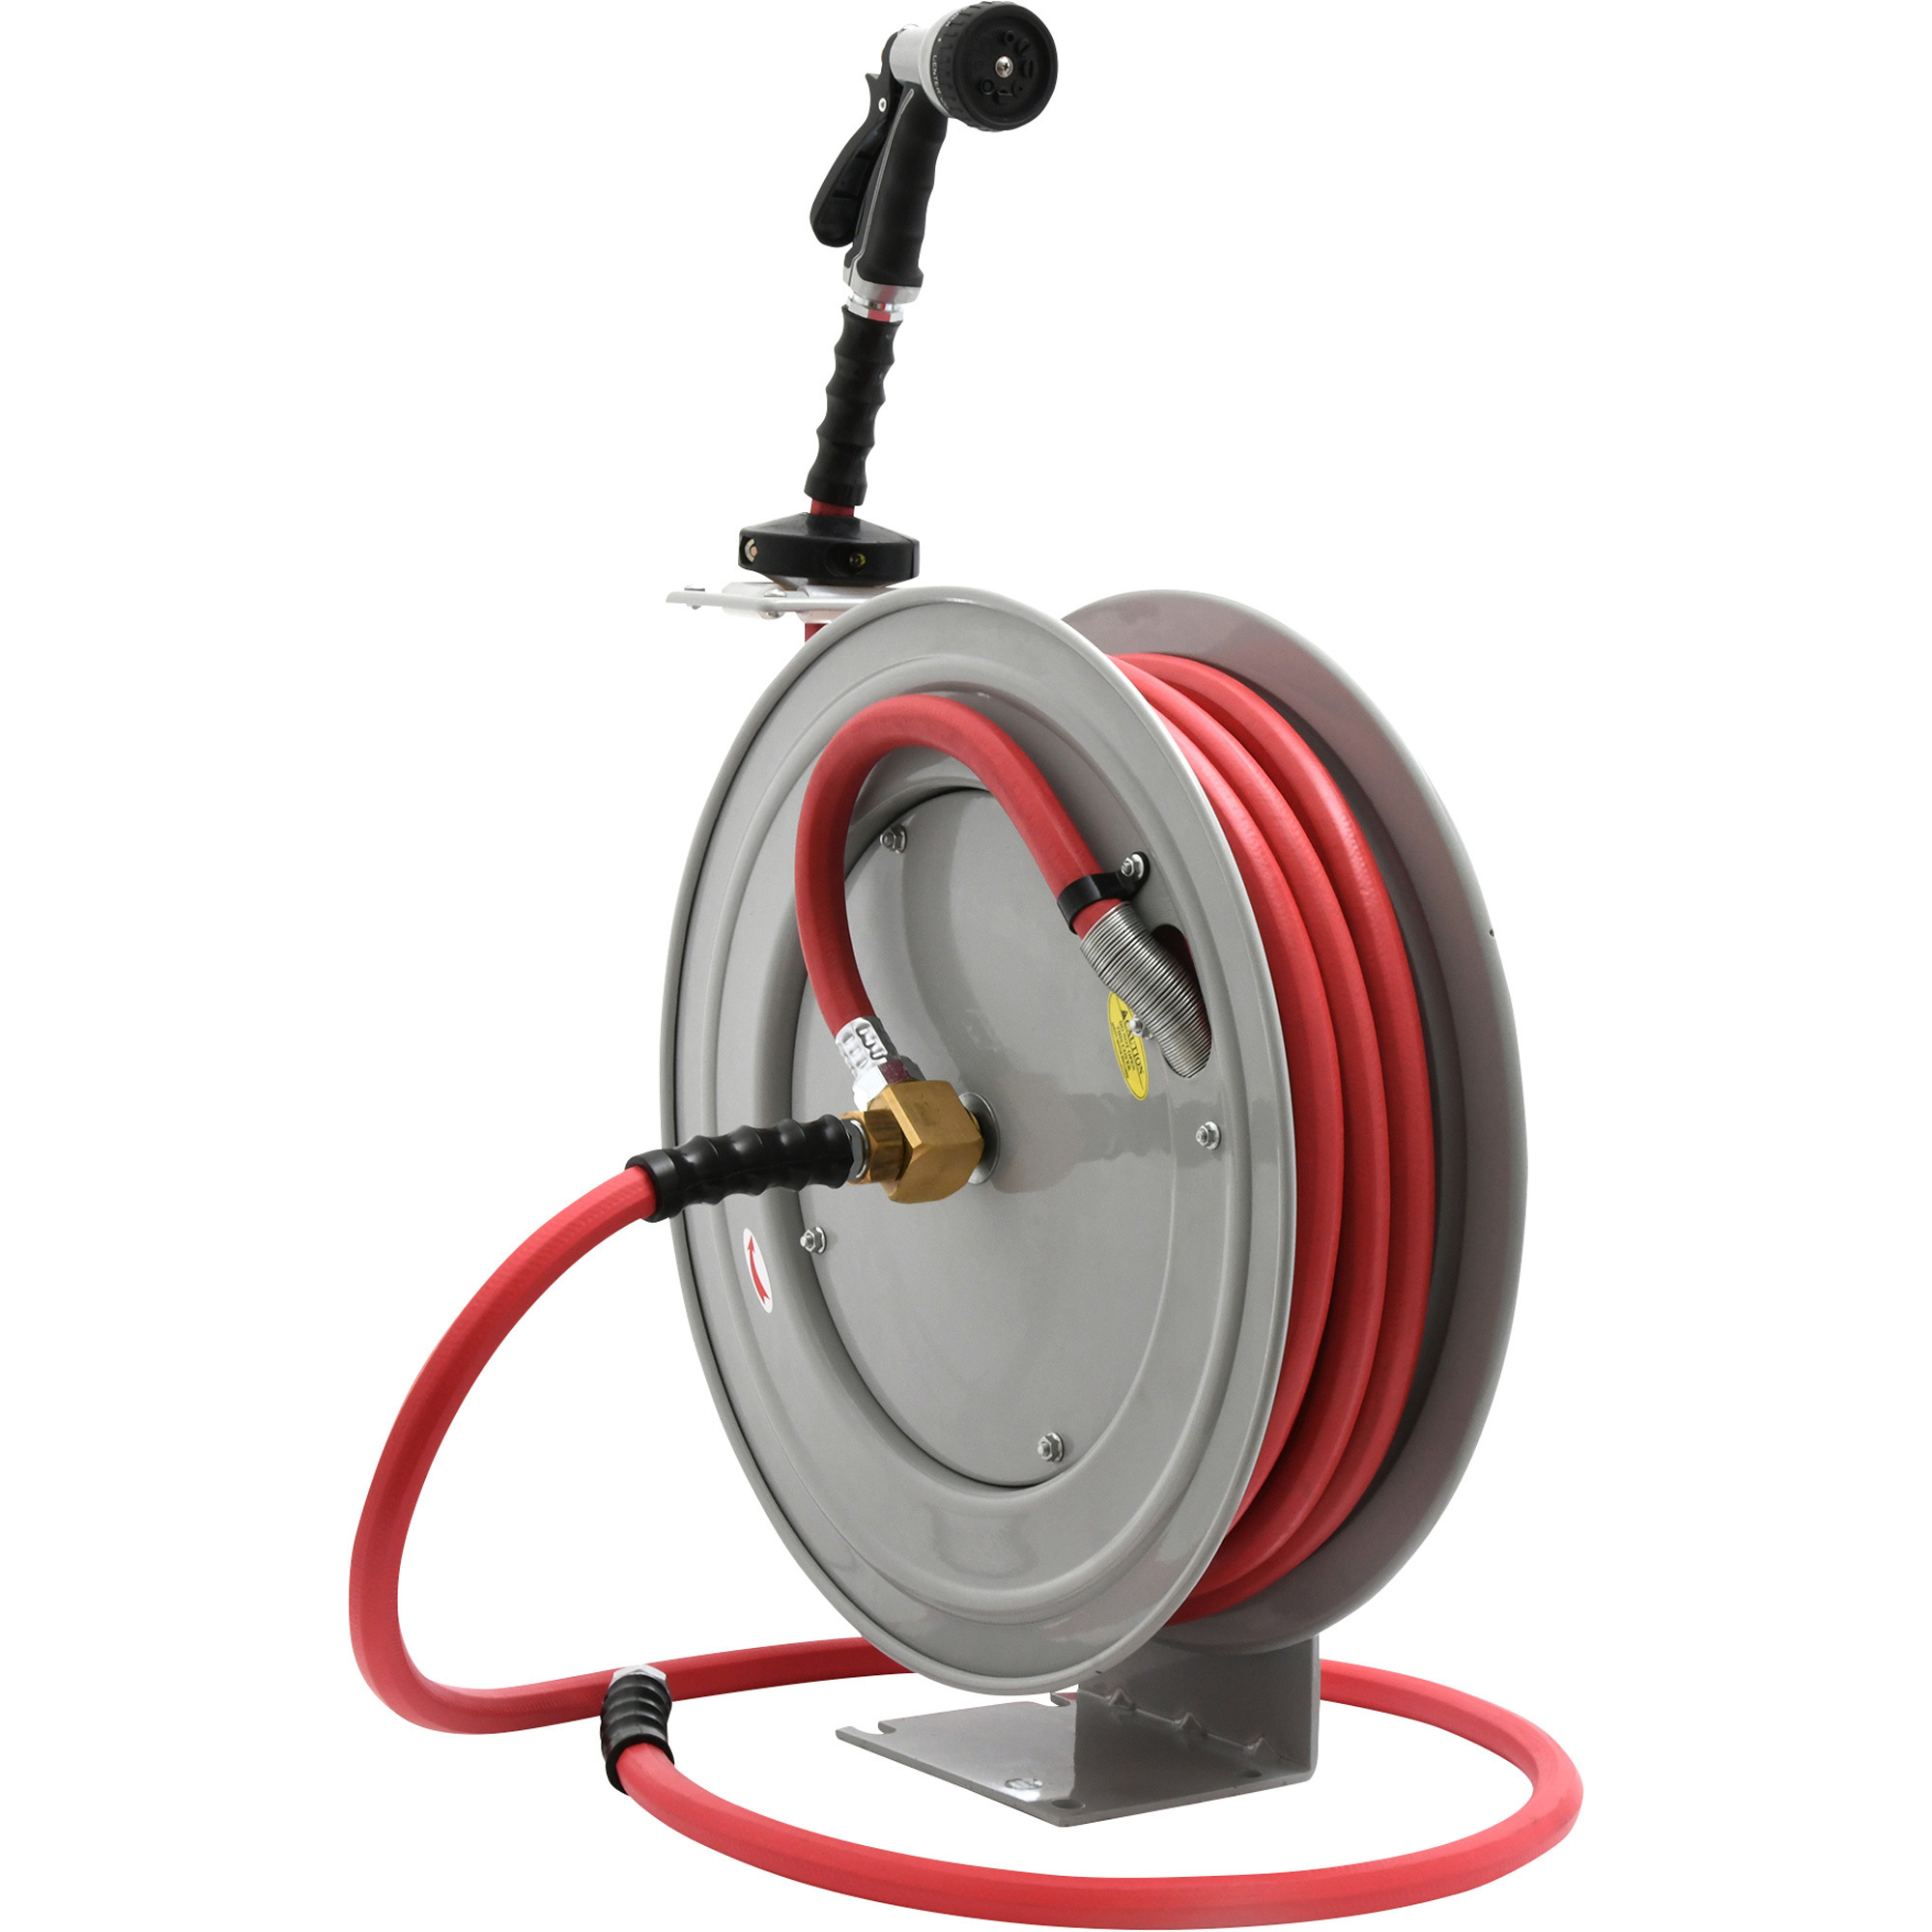 Avagard Retractable Hose Reel, Includes 5/8Inch x 50ft. Hot/Cold Water Hose, Model AVGWR5850-2